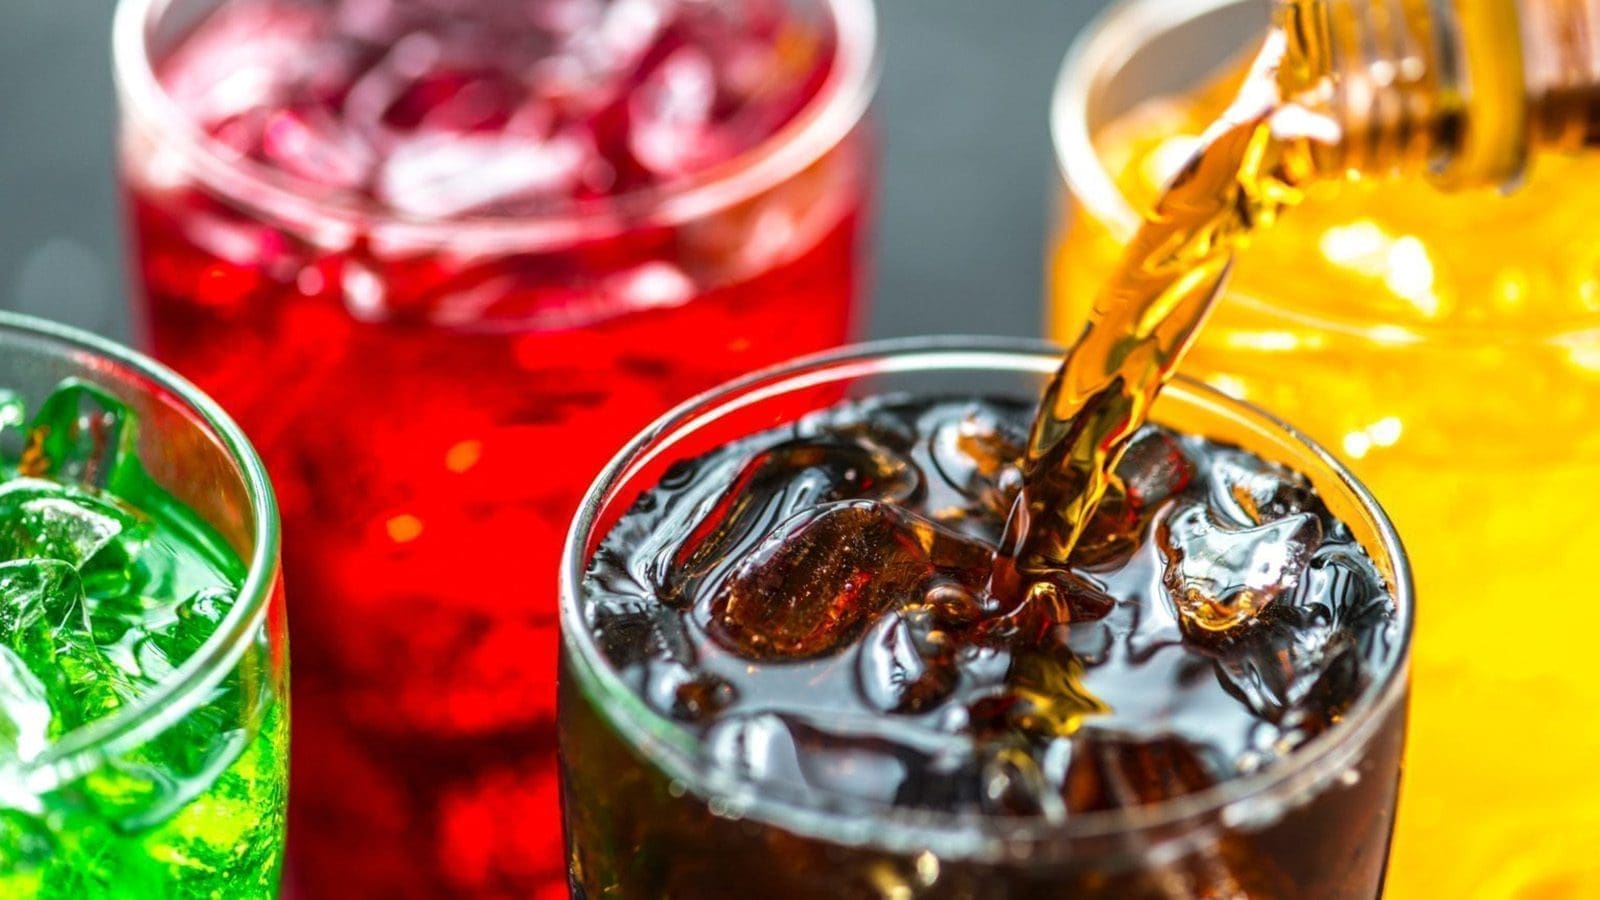 Nigeria introduces sugar tax on non-alcoholic beverages to encourage healthy lifestyle